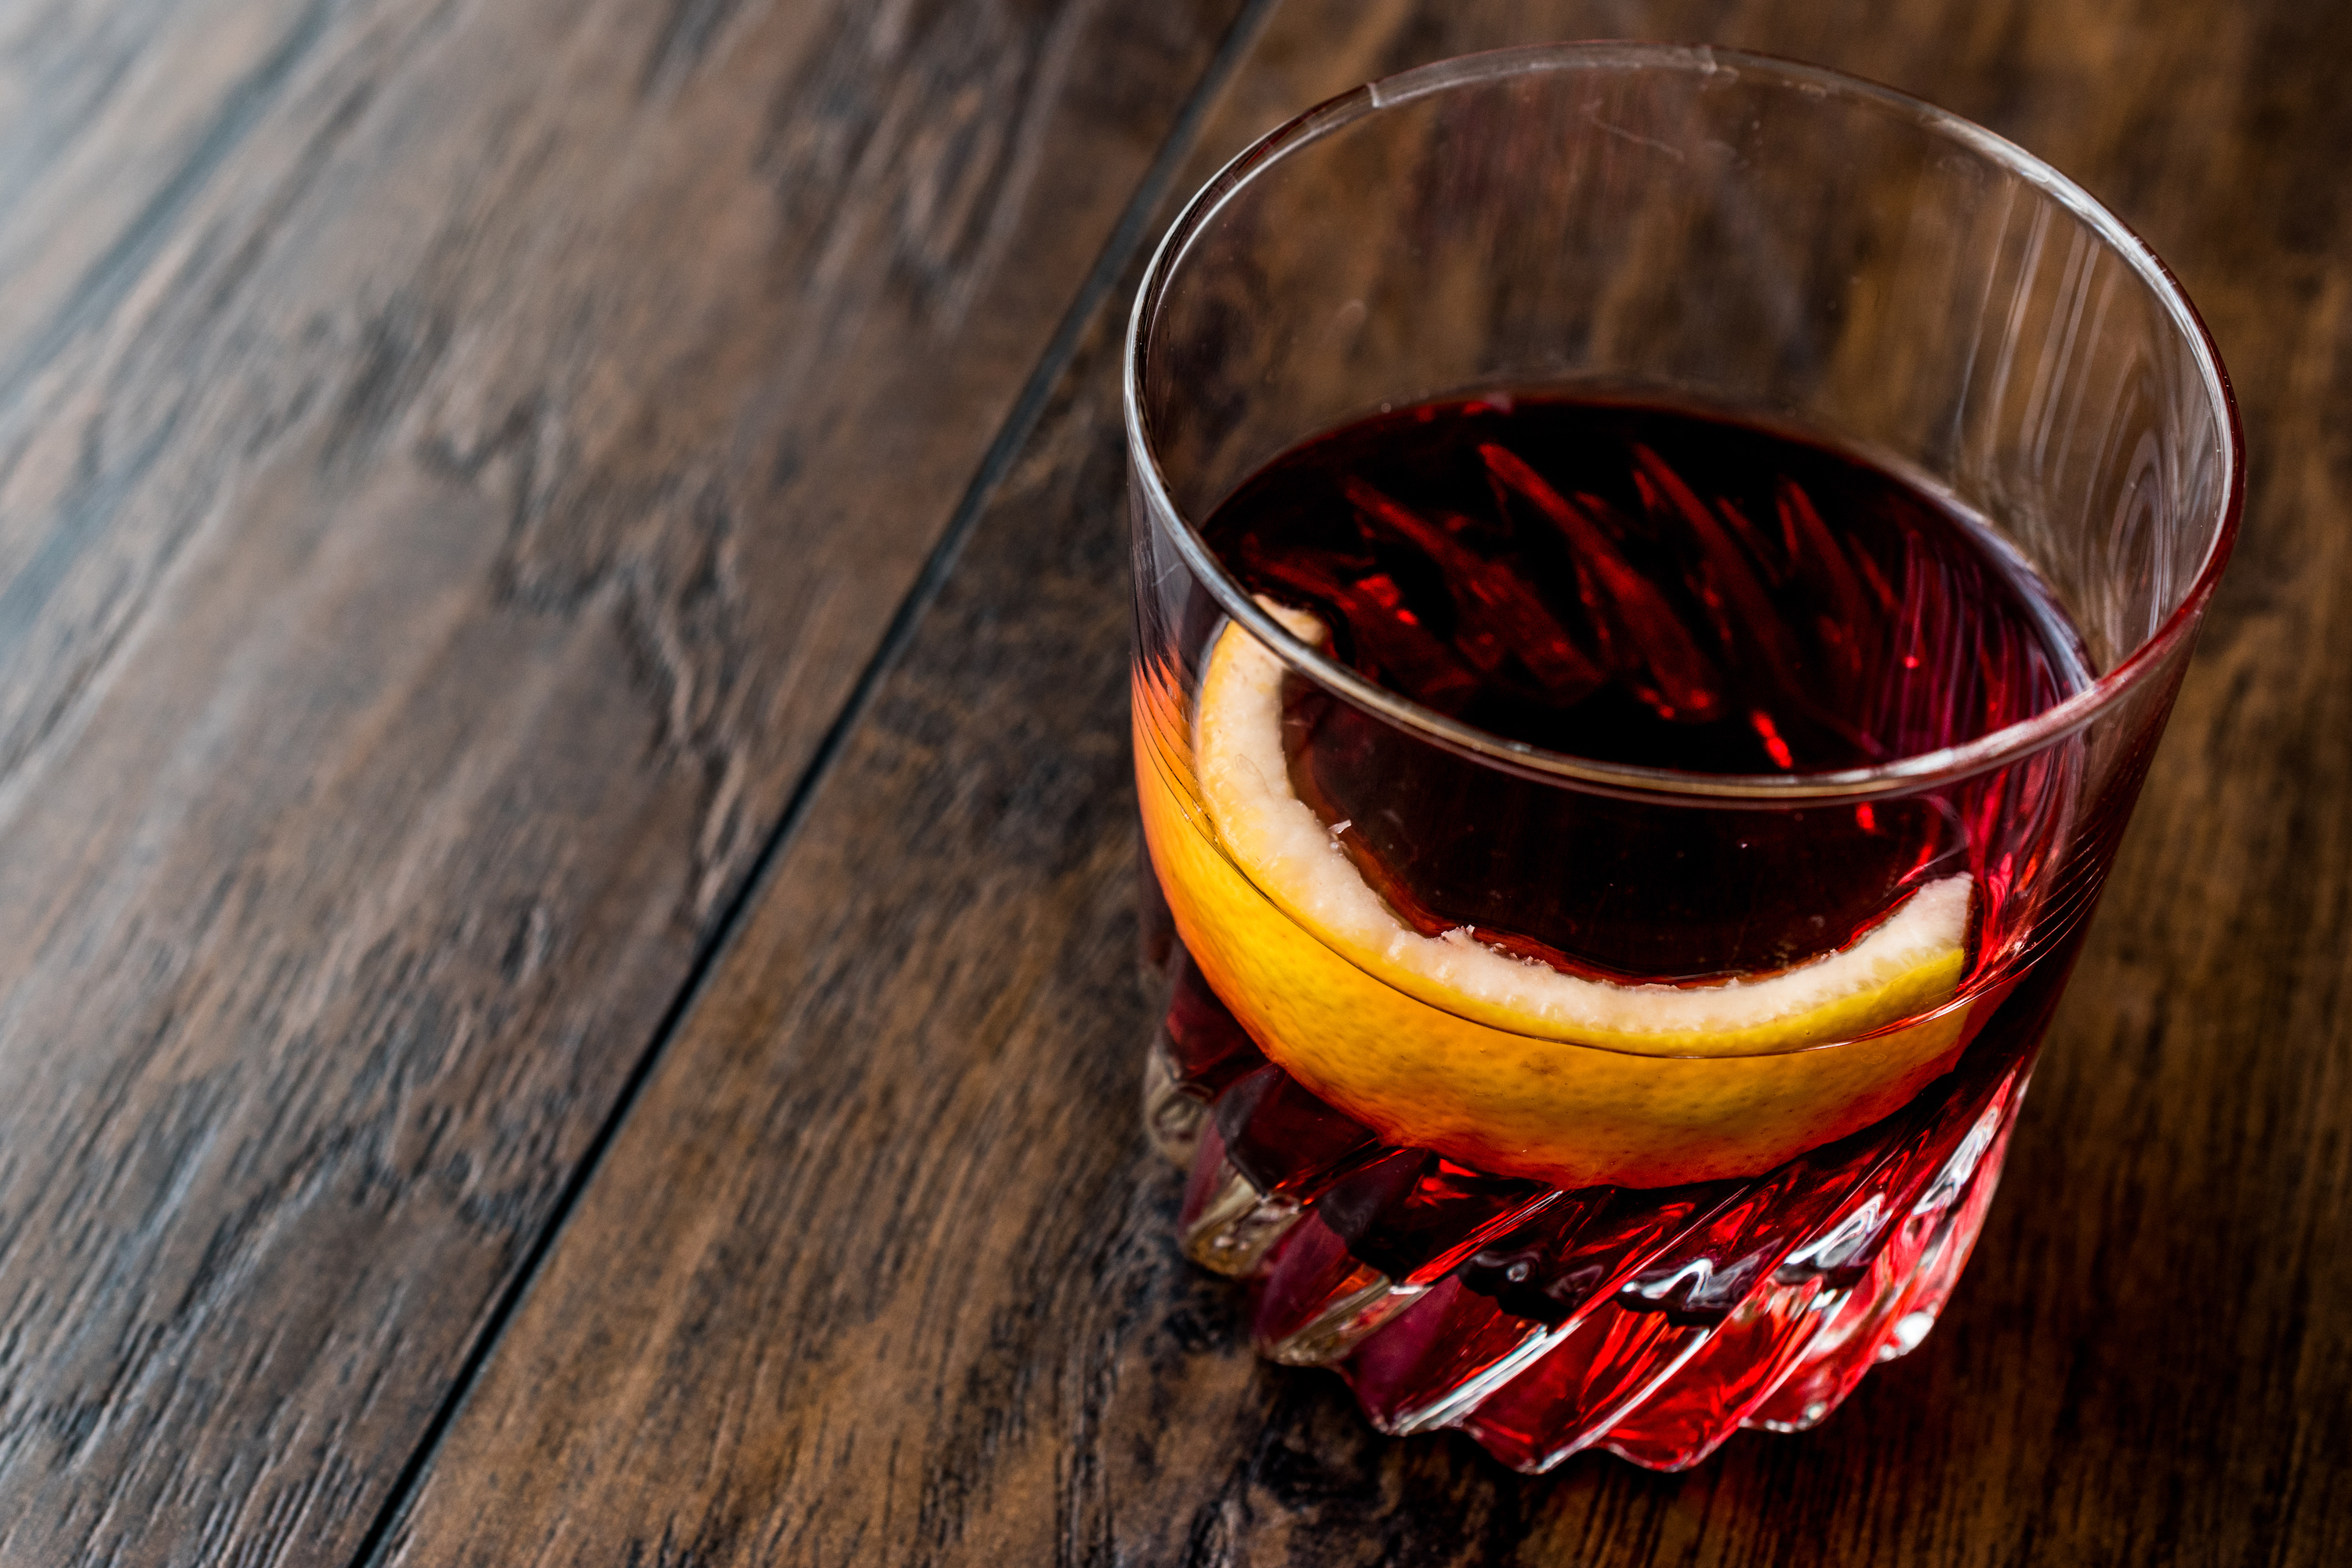 Sipping Sazeracs: The story of America’s very first cocktail